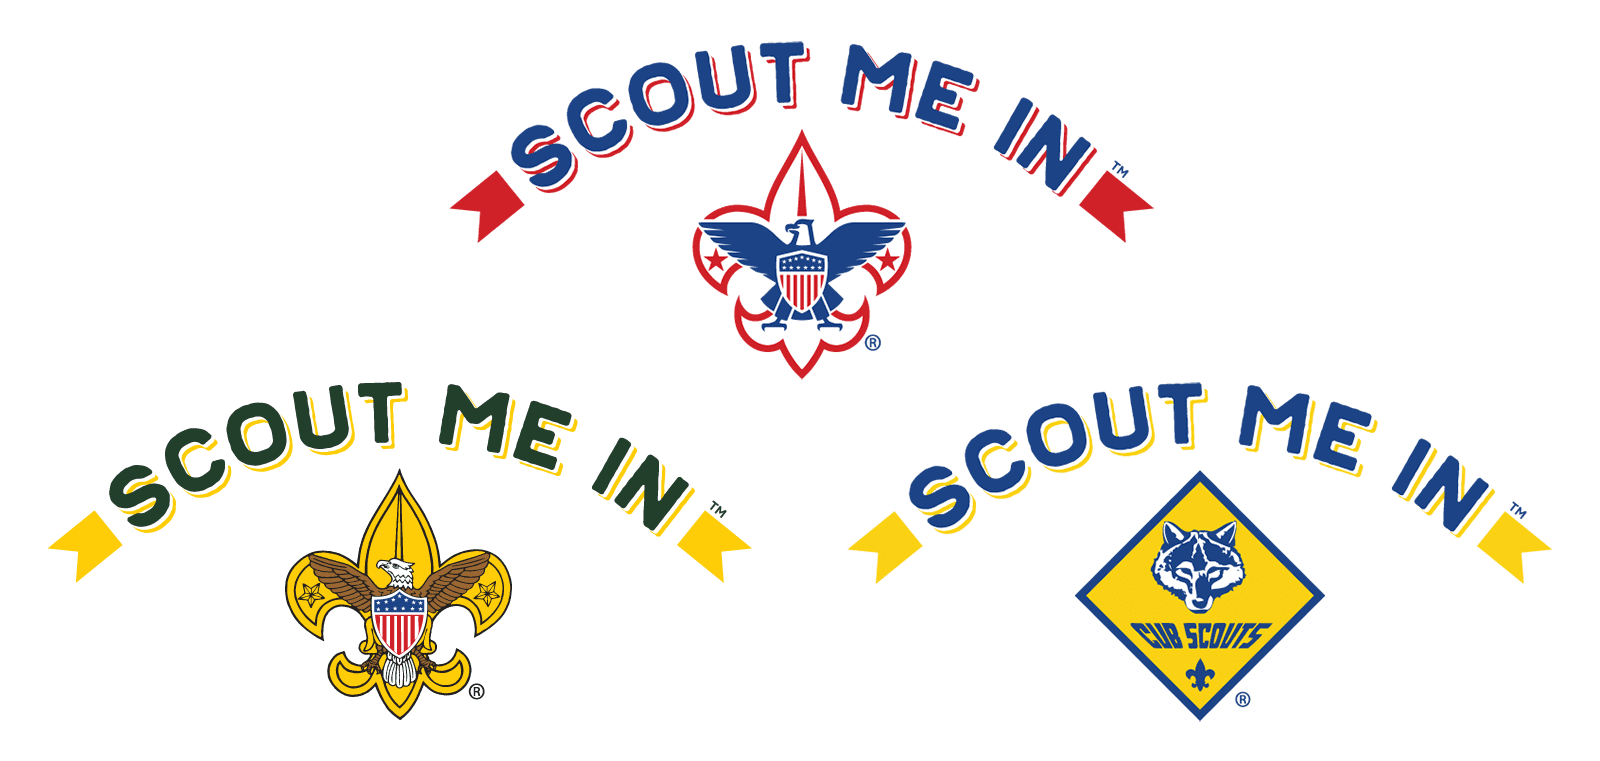 Download Family Scouting | Boy Scouts of America